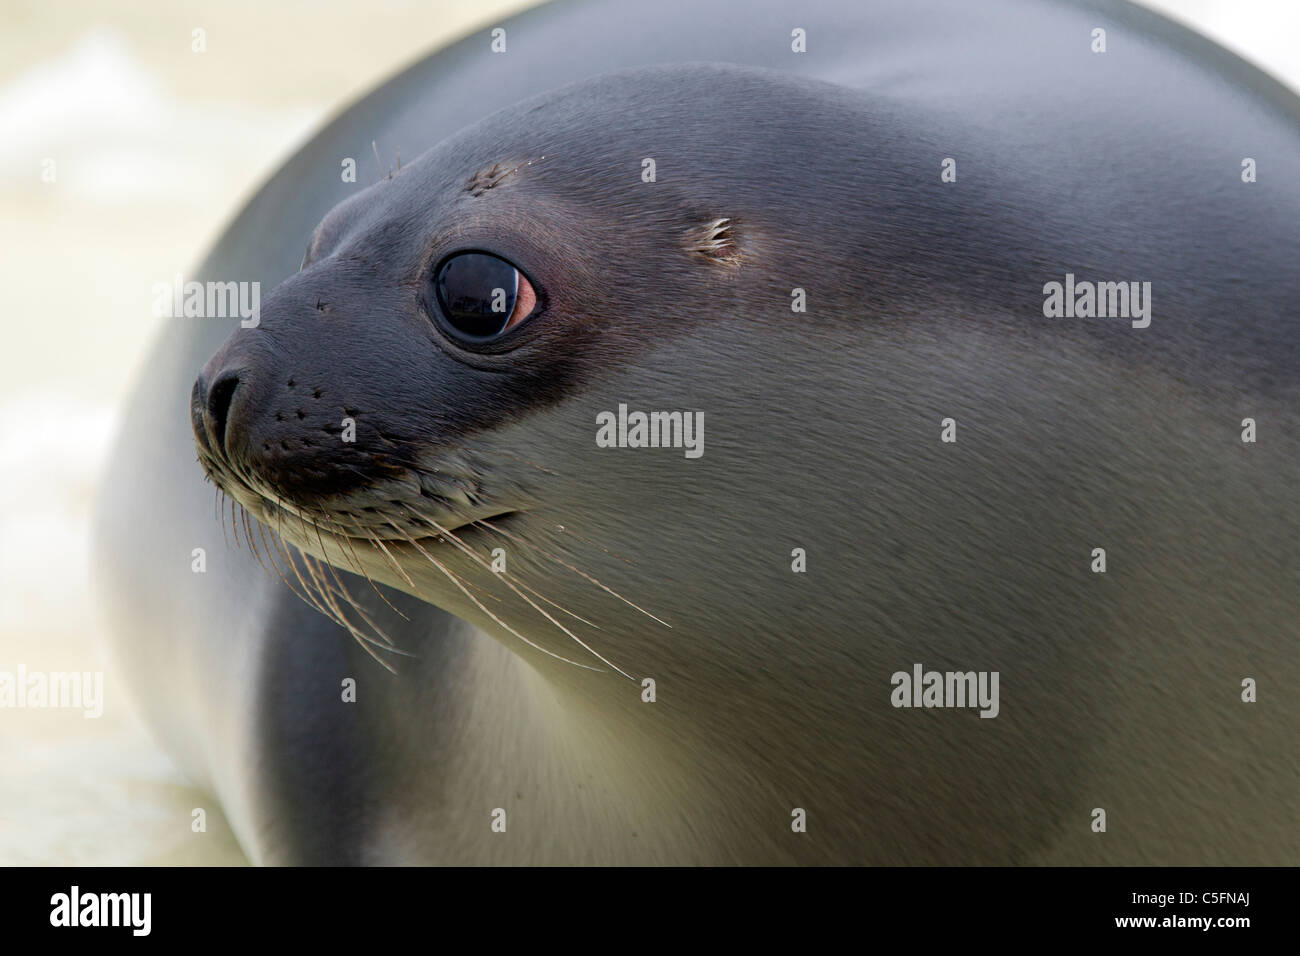 Hooded seal (Cystophora cristata), young female close-up, Germany Stock Photo